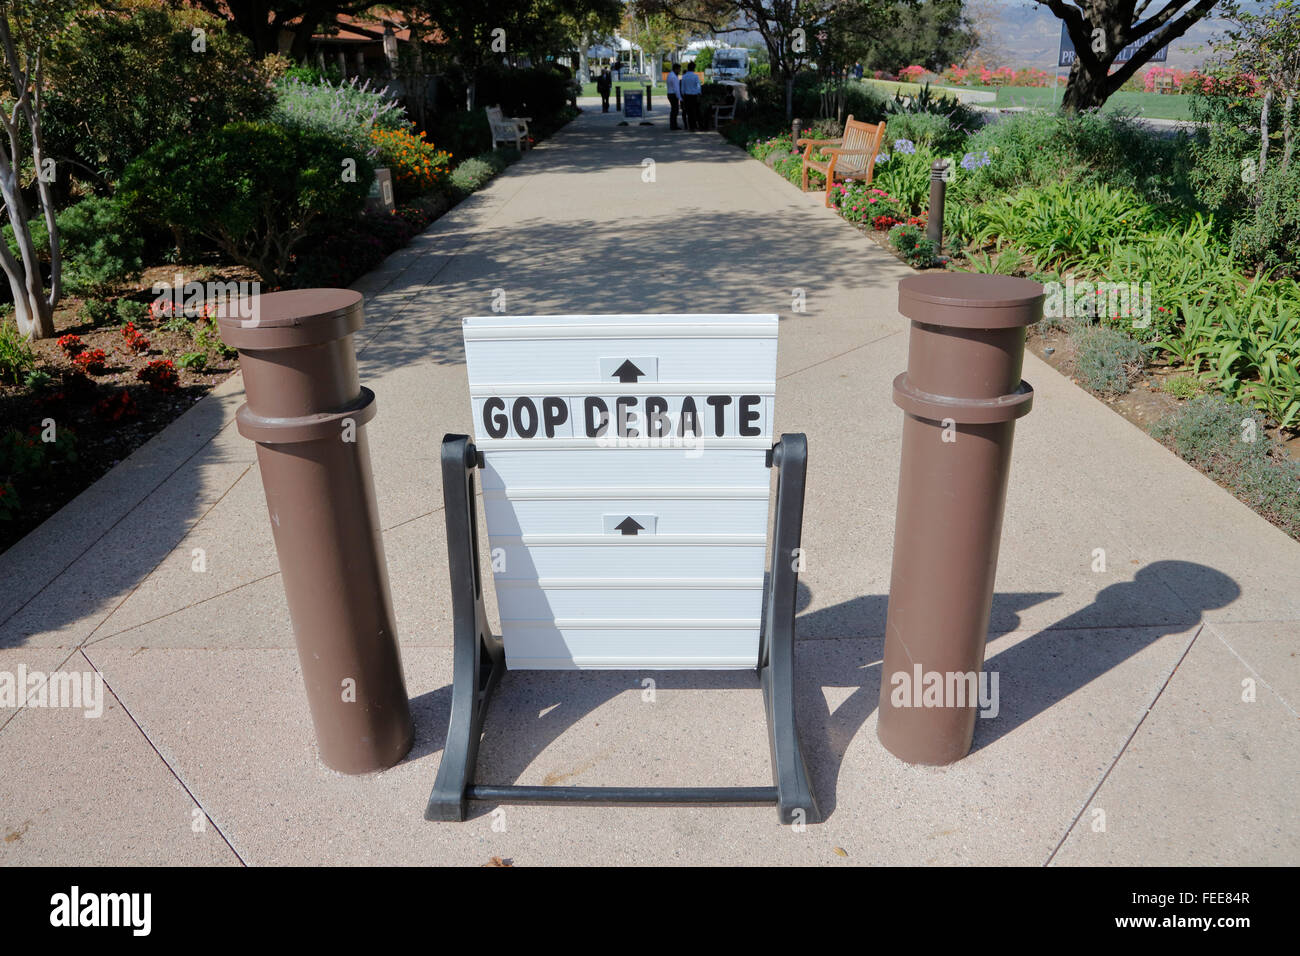 REAGAN PRESIDENTIAL LIBRARY, SIMI VALLEY, LA, CA - SEPTEMBER 16, 2015, sign directs to GOP Republican Presidential Debate Stock Photo